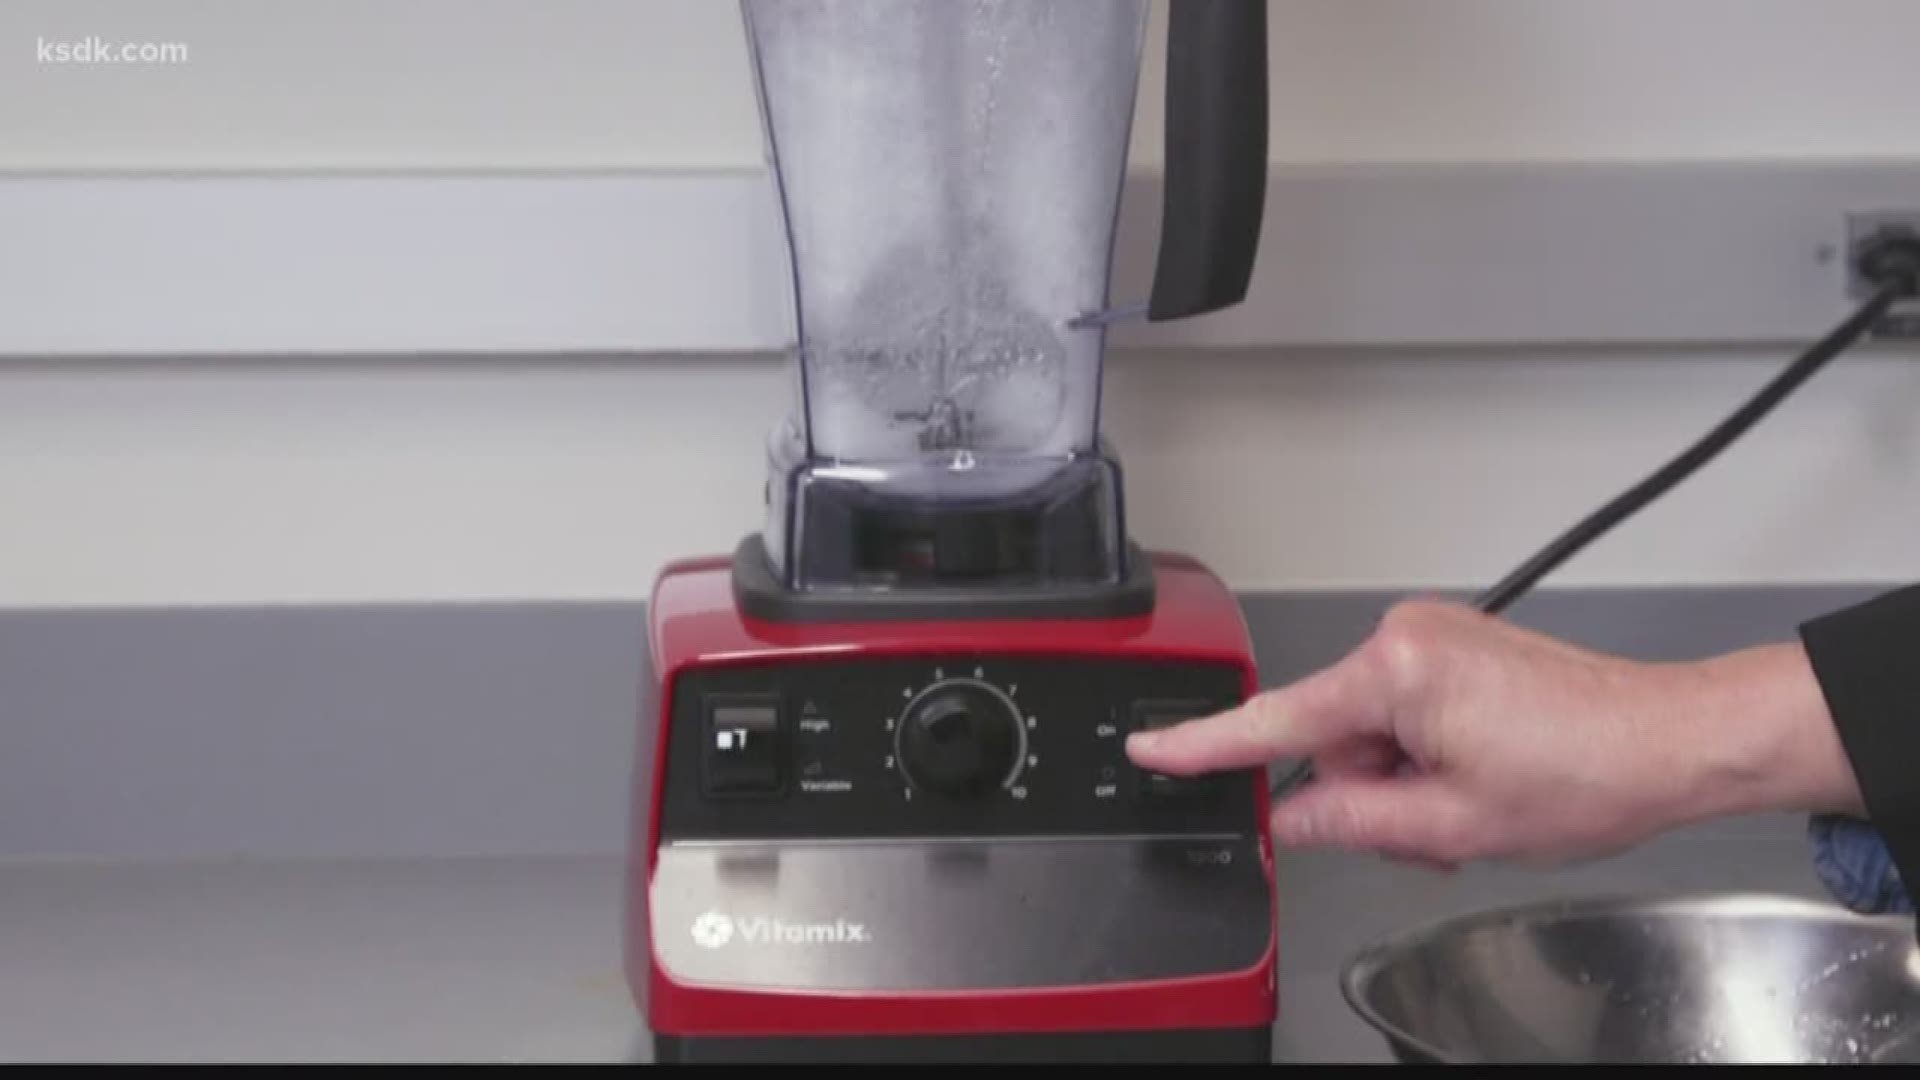 Consumer Reports put 70 of the top blenders through tough tests.